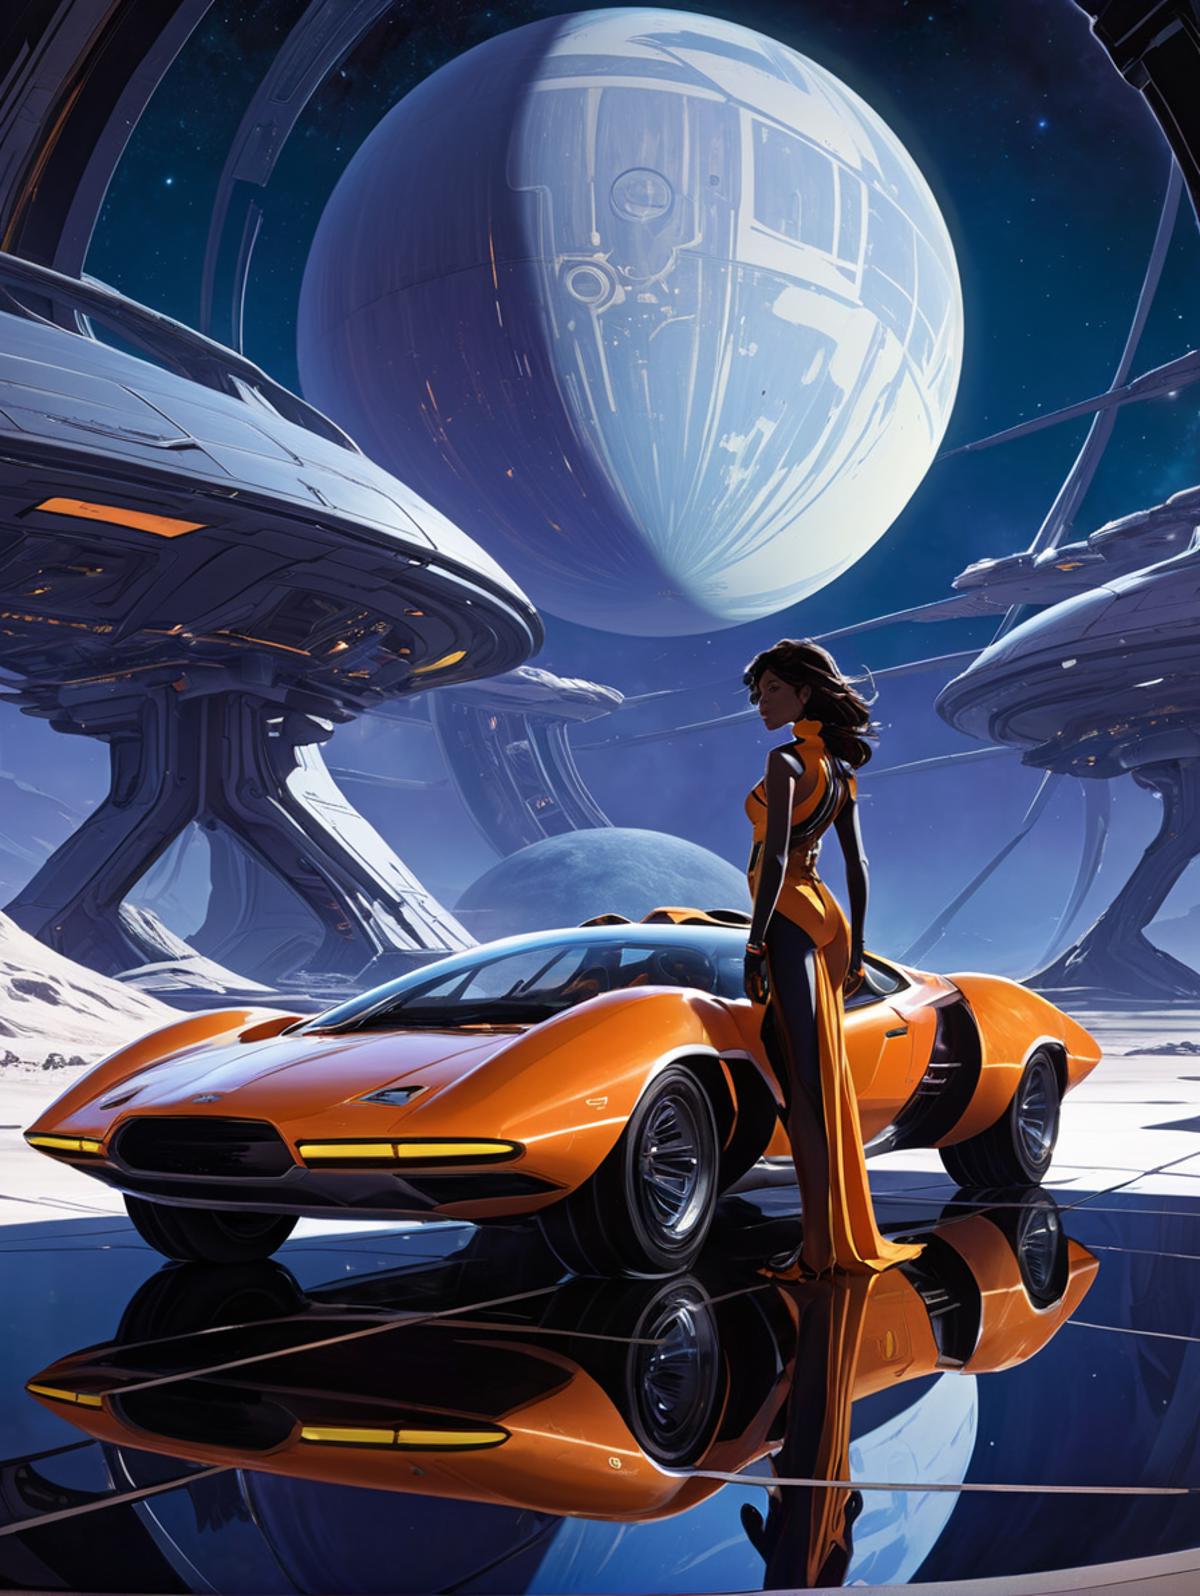 Futuristic Orange Race Car with Woman Standing in Front of Spacecraft